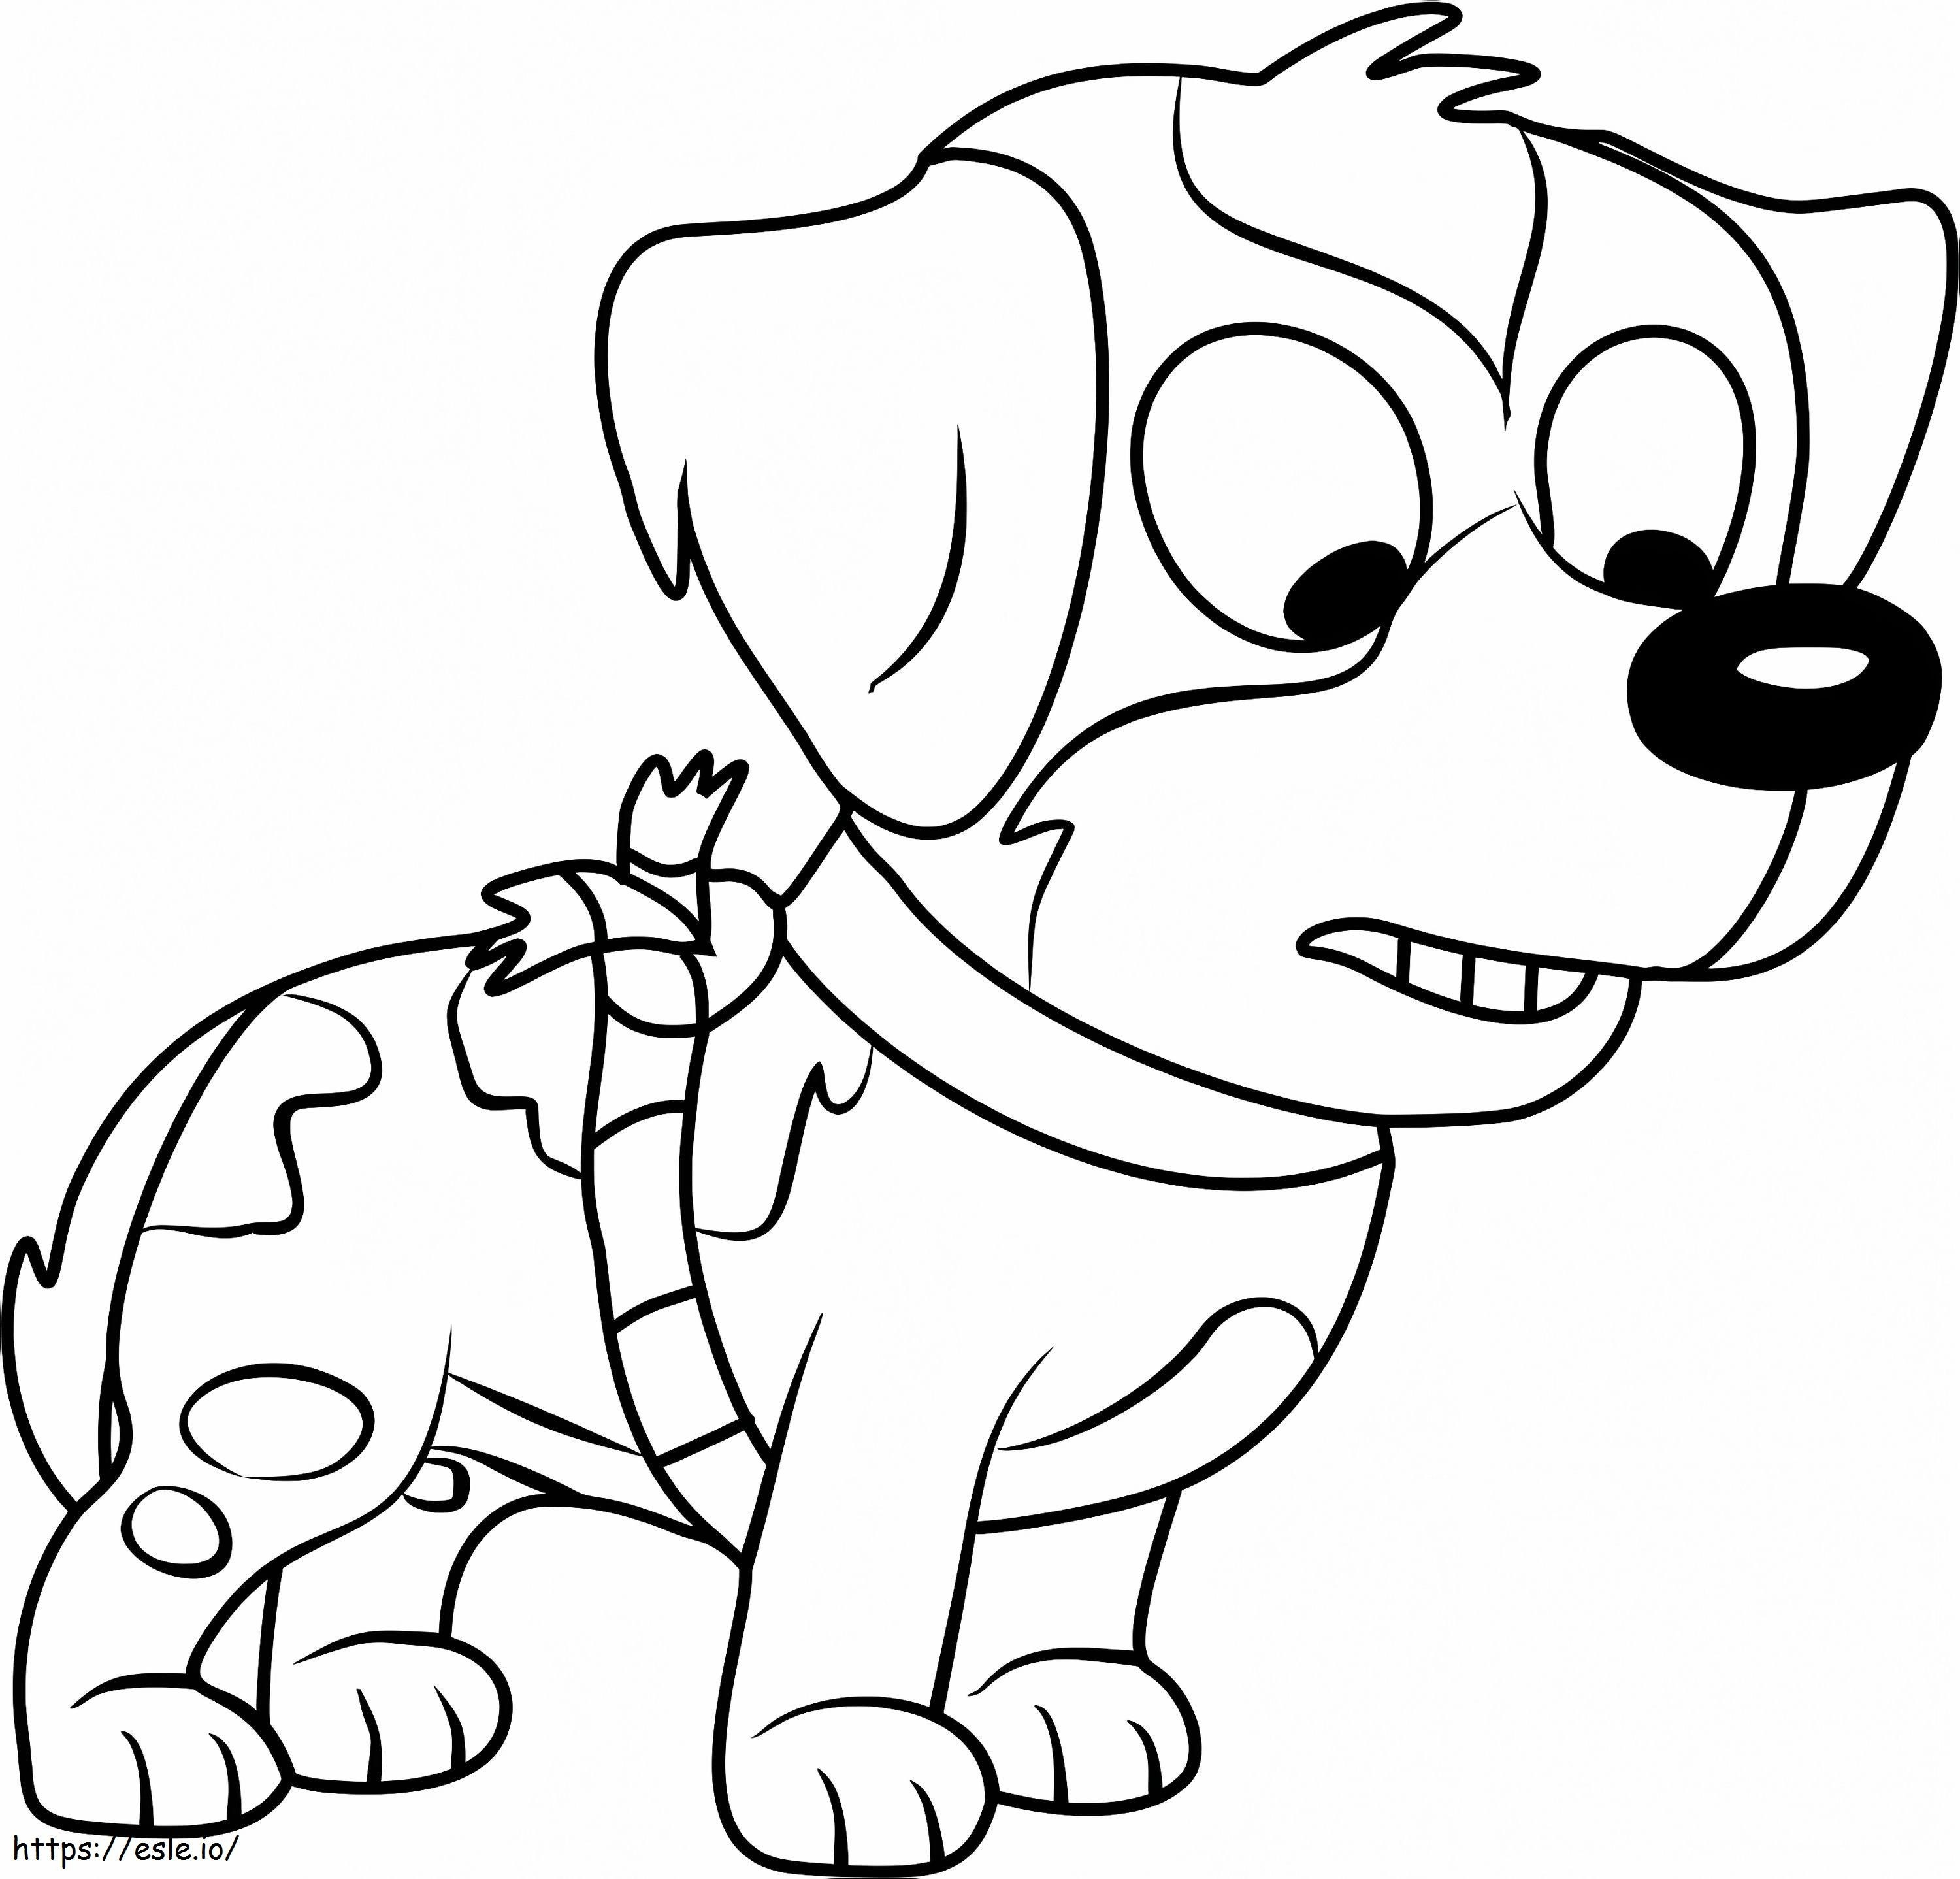 Sweetie From Pound Puppies coloring page